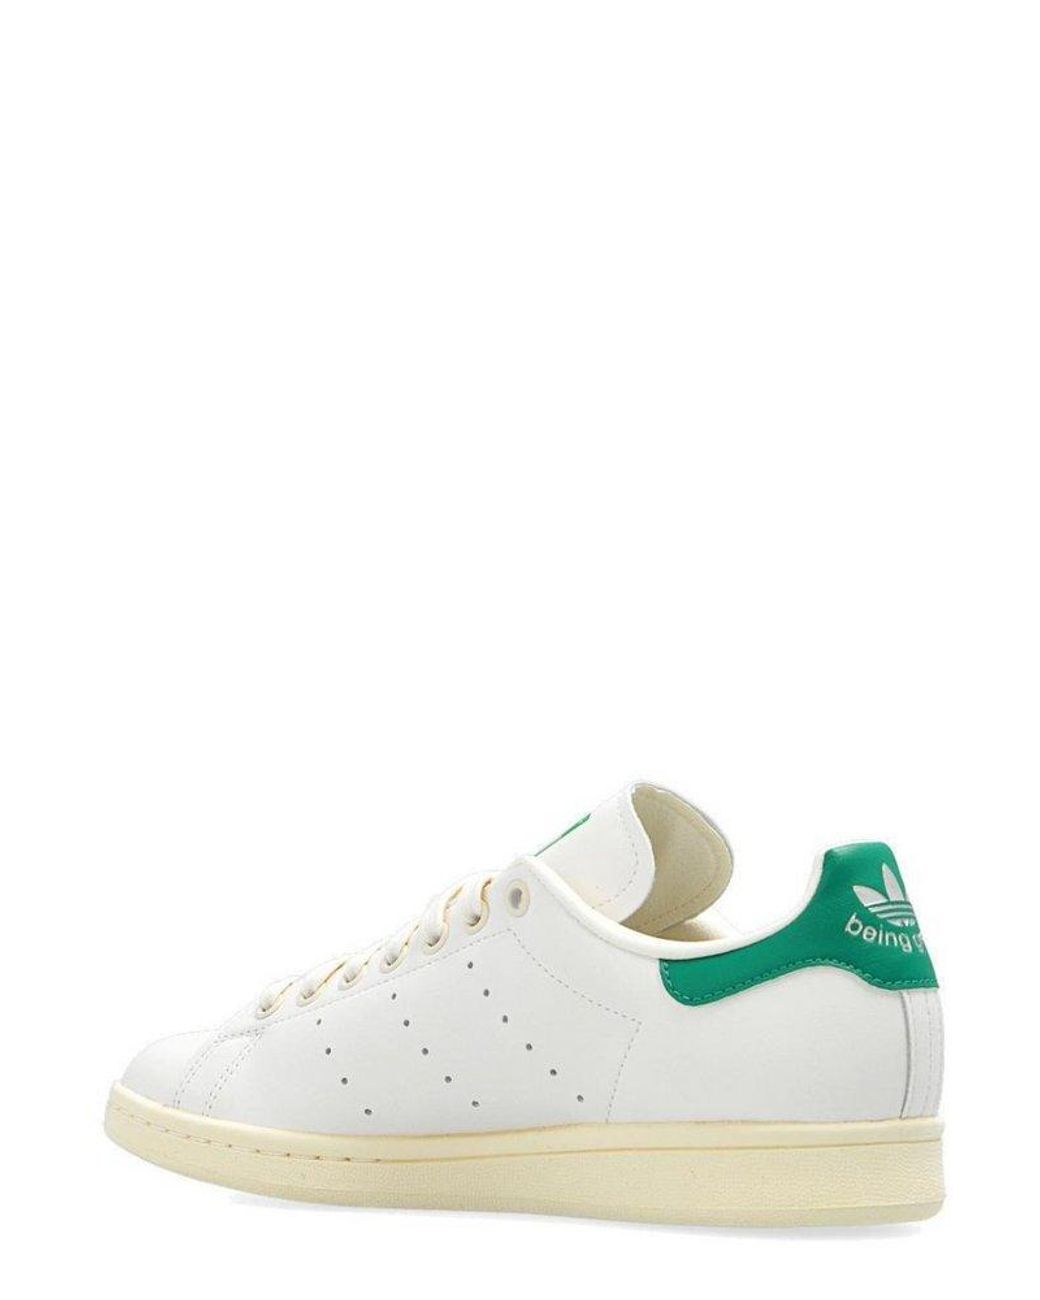 adidas Originals Stan Smith Marvel Dr Sneakers in White | Lyst